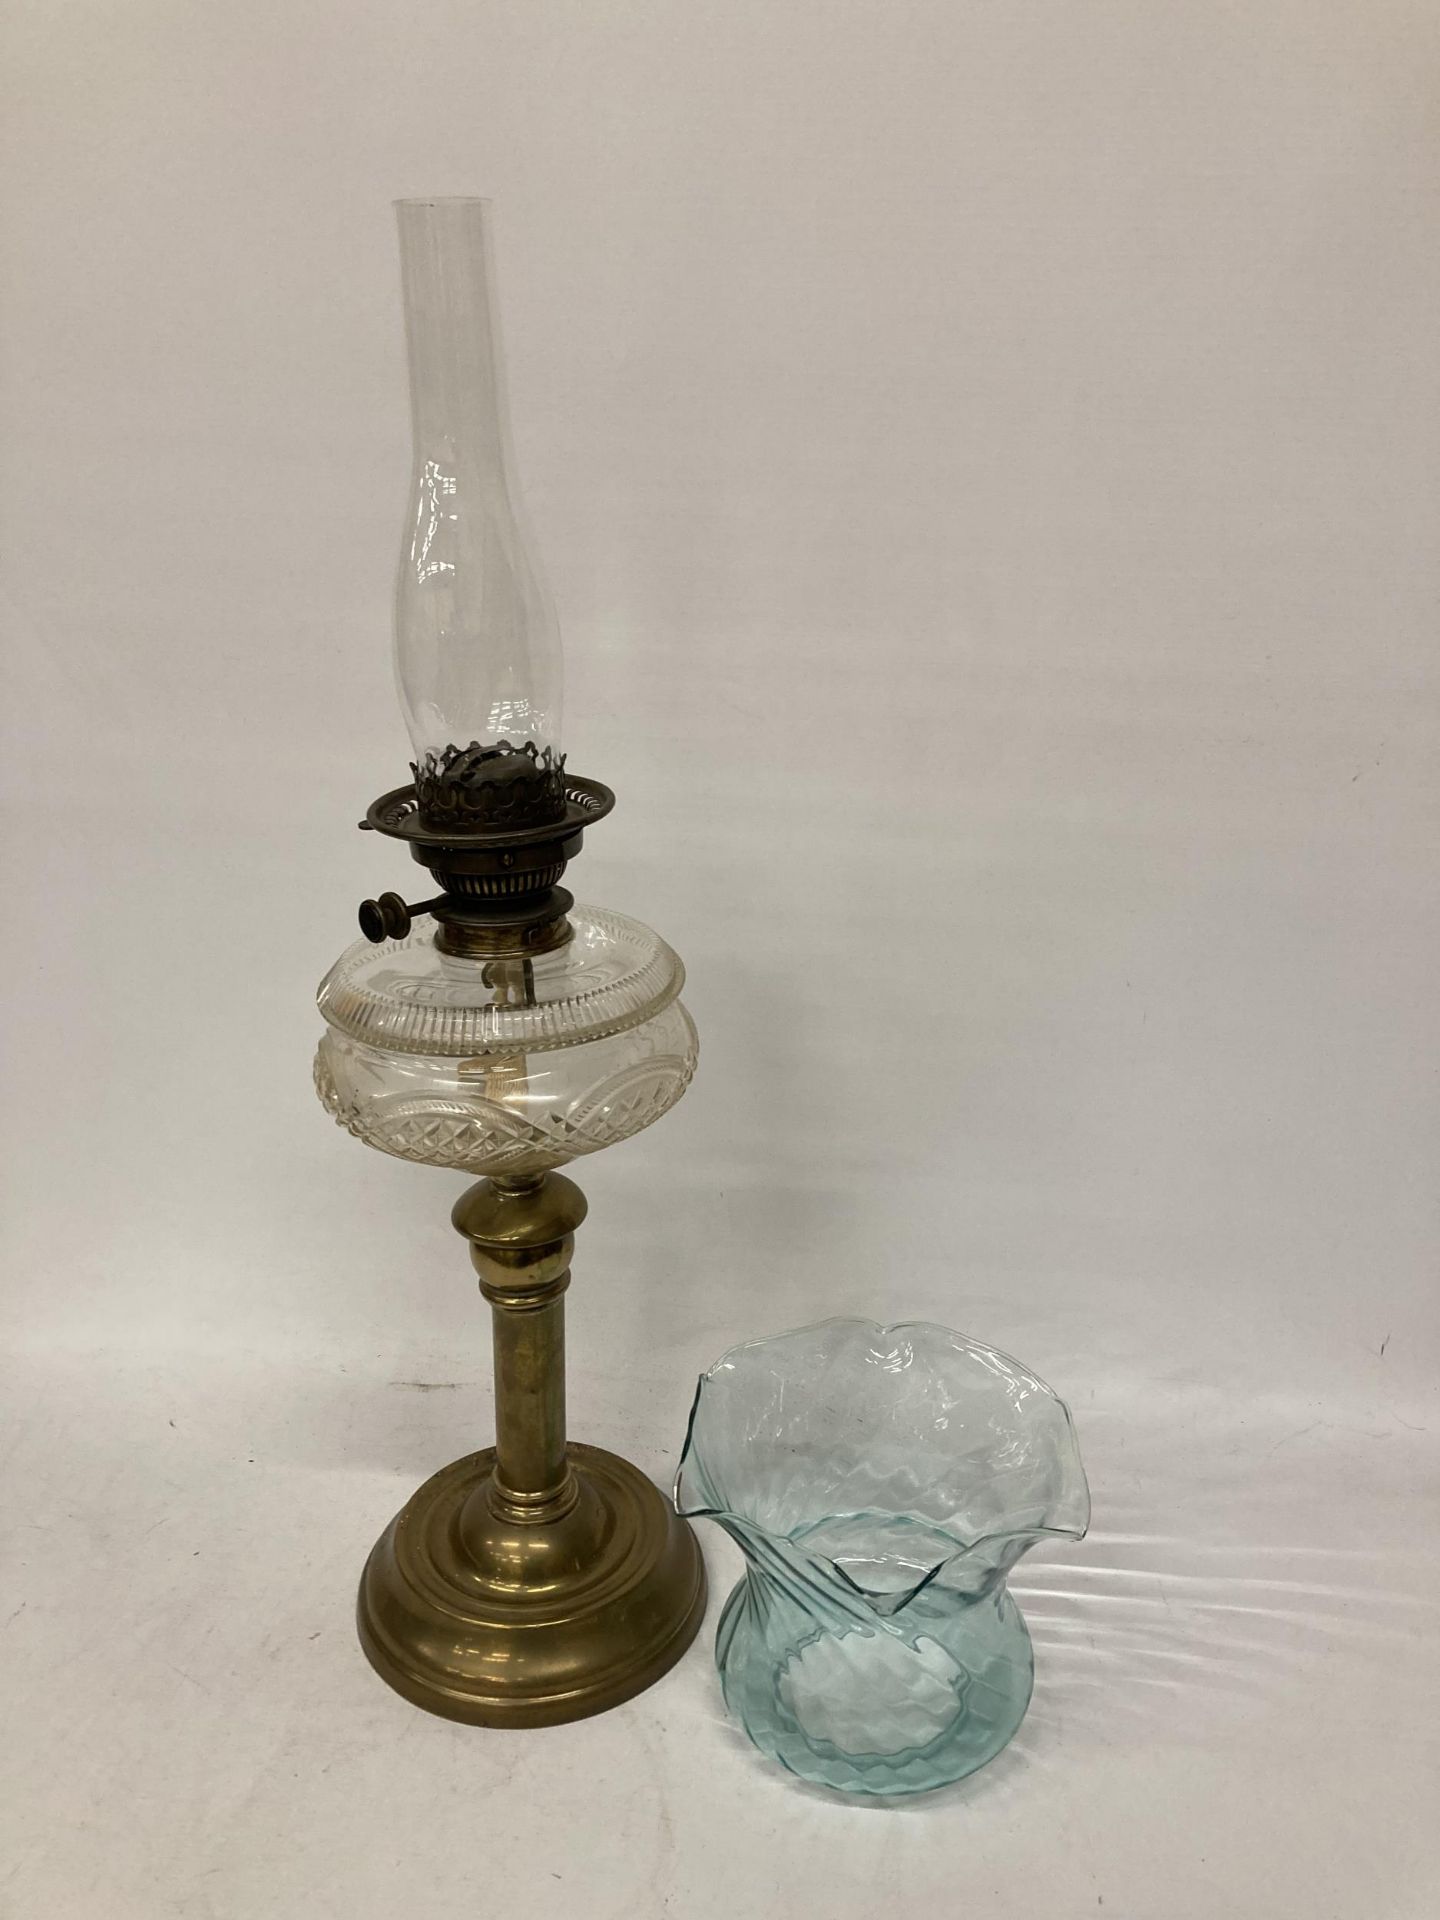 A VINTAGE OIL LAMP WITH BRASS BASE, CLEAR CUT GLASS OIL RESERVOIR, TURQUOISE SHADE AND GLASS FUNNEL - Image 4 of 4